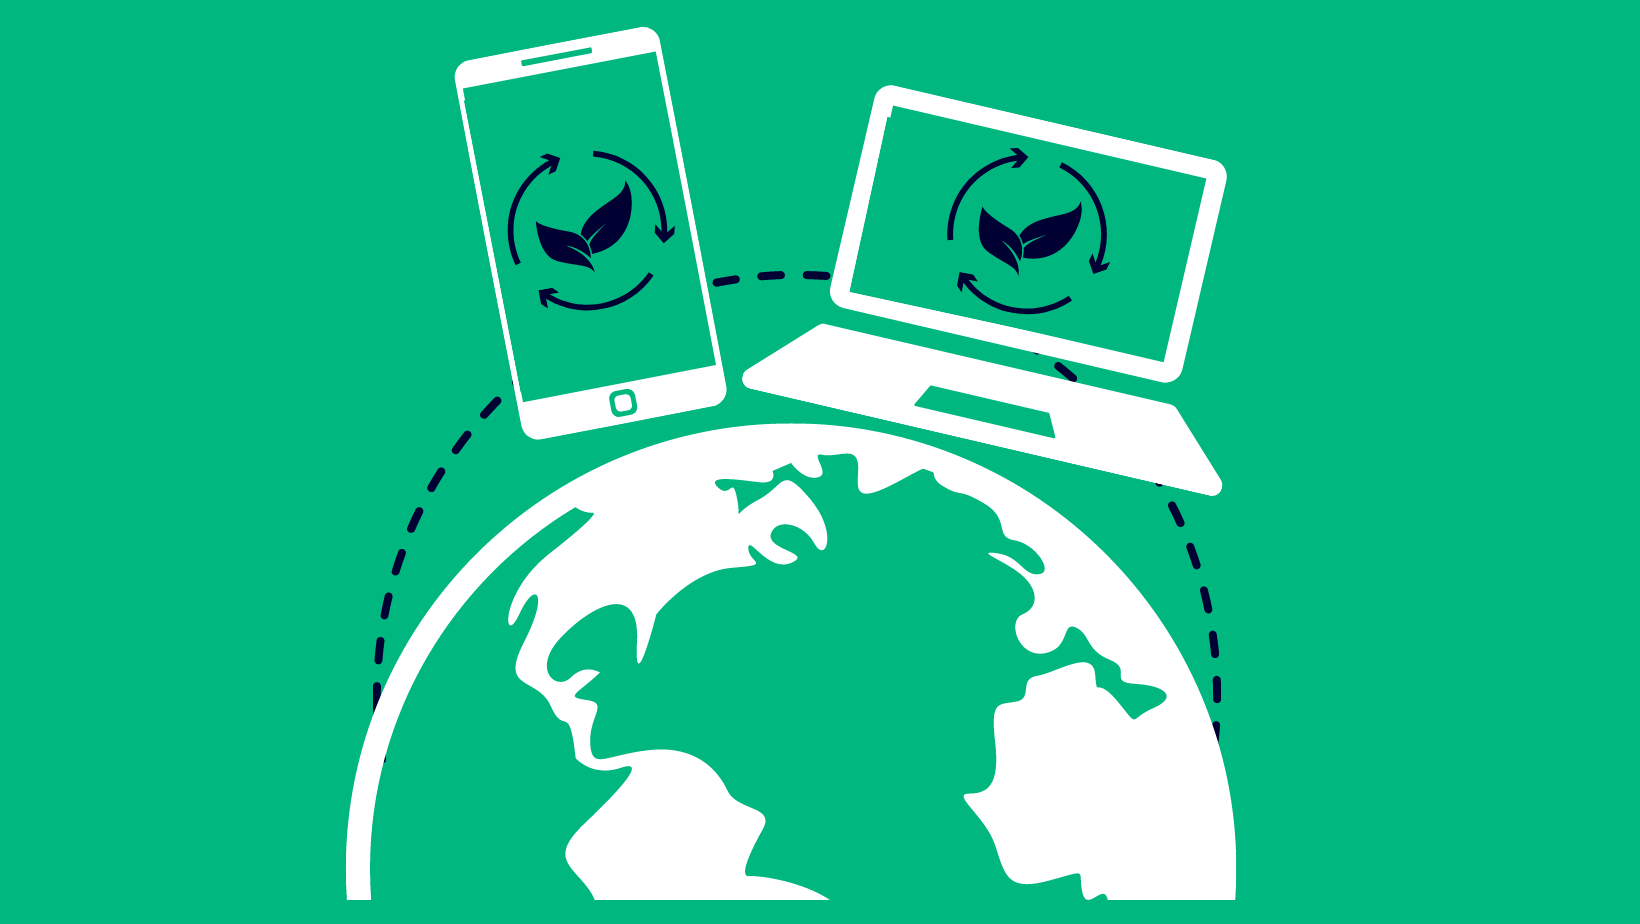 An image with an illustration of the earth and a phone and laptop above representing going green with digital marketing